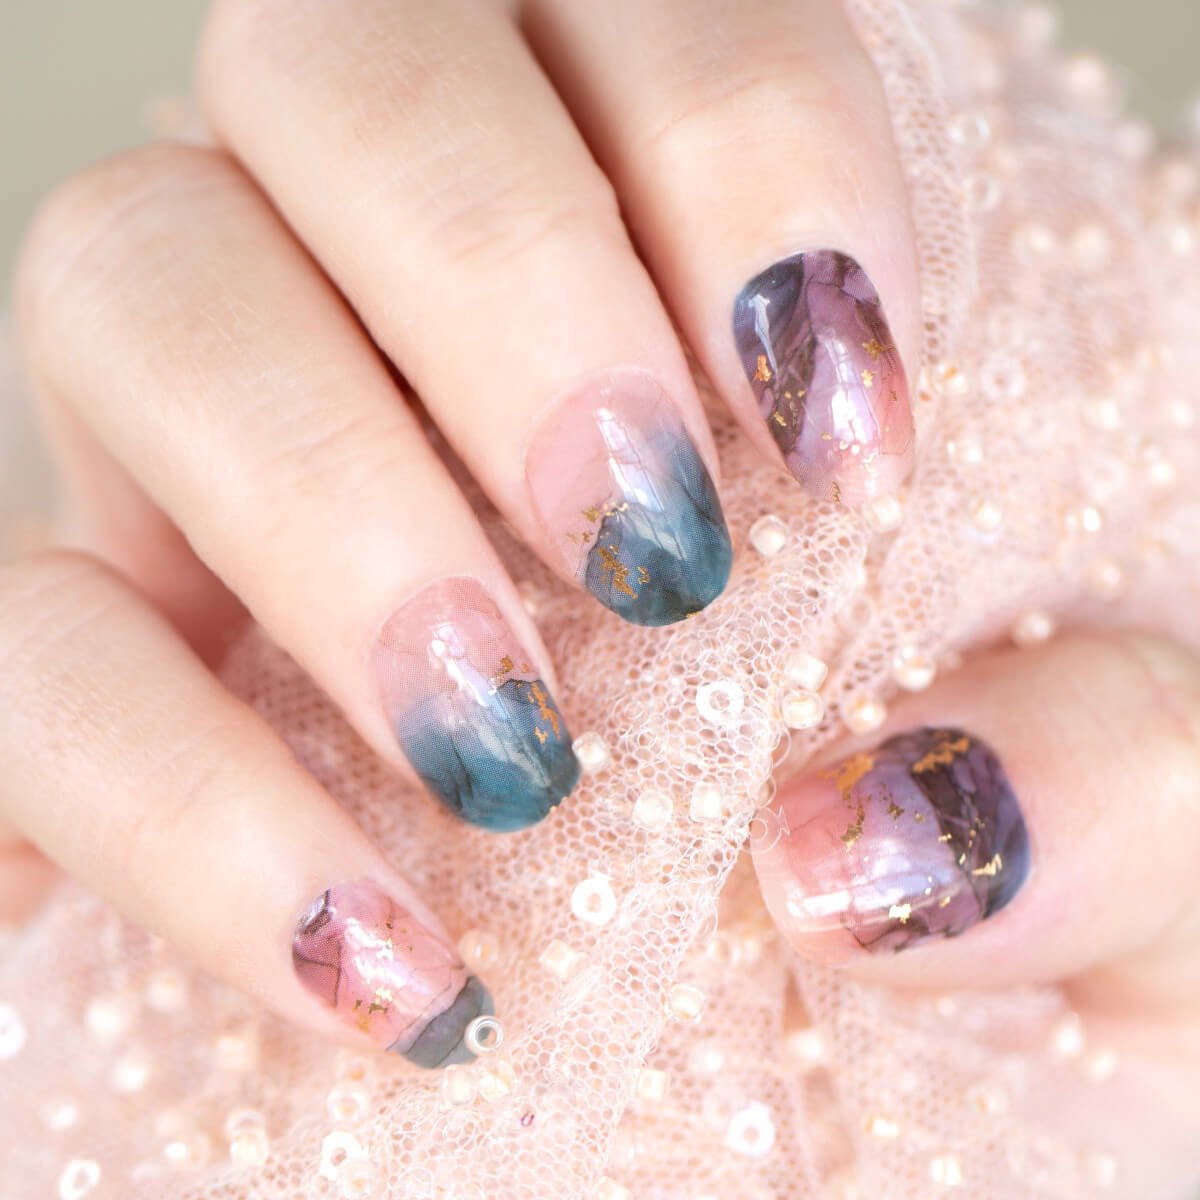 Marble nails: How to get the manicure trend in 5 steps